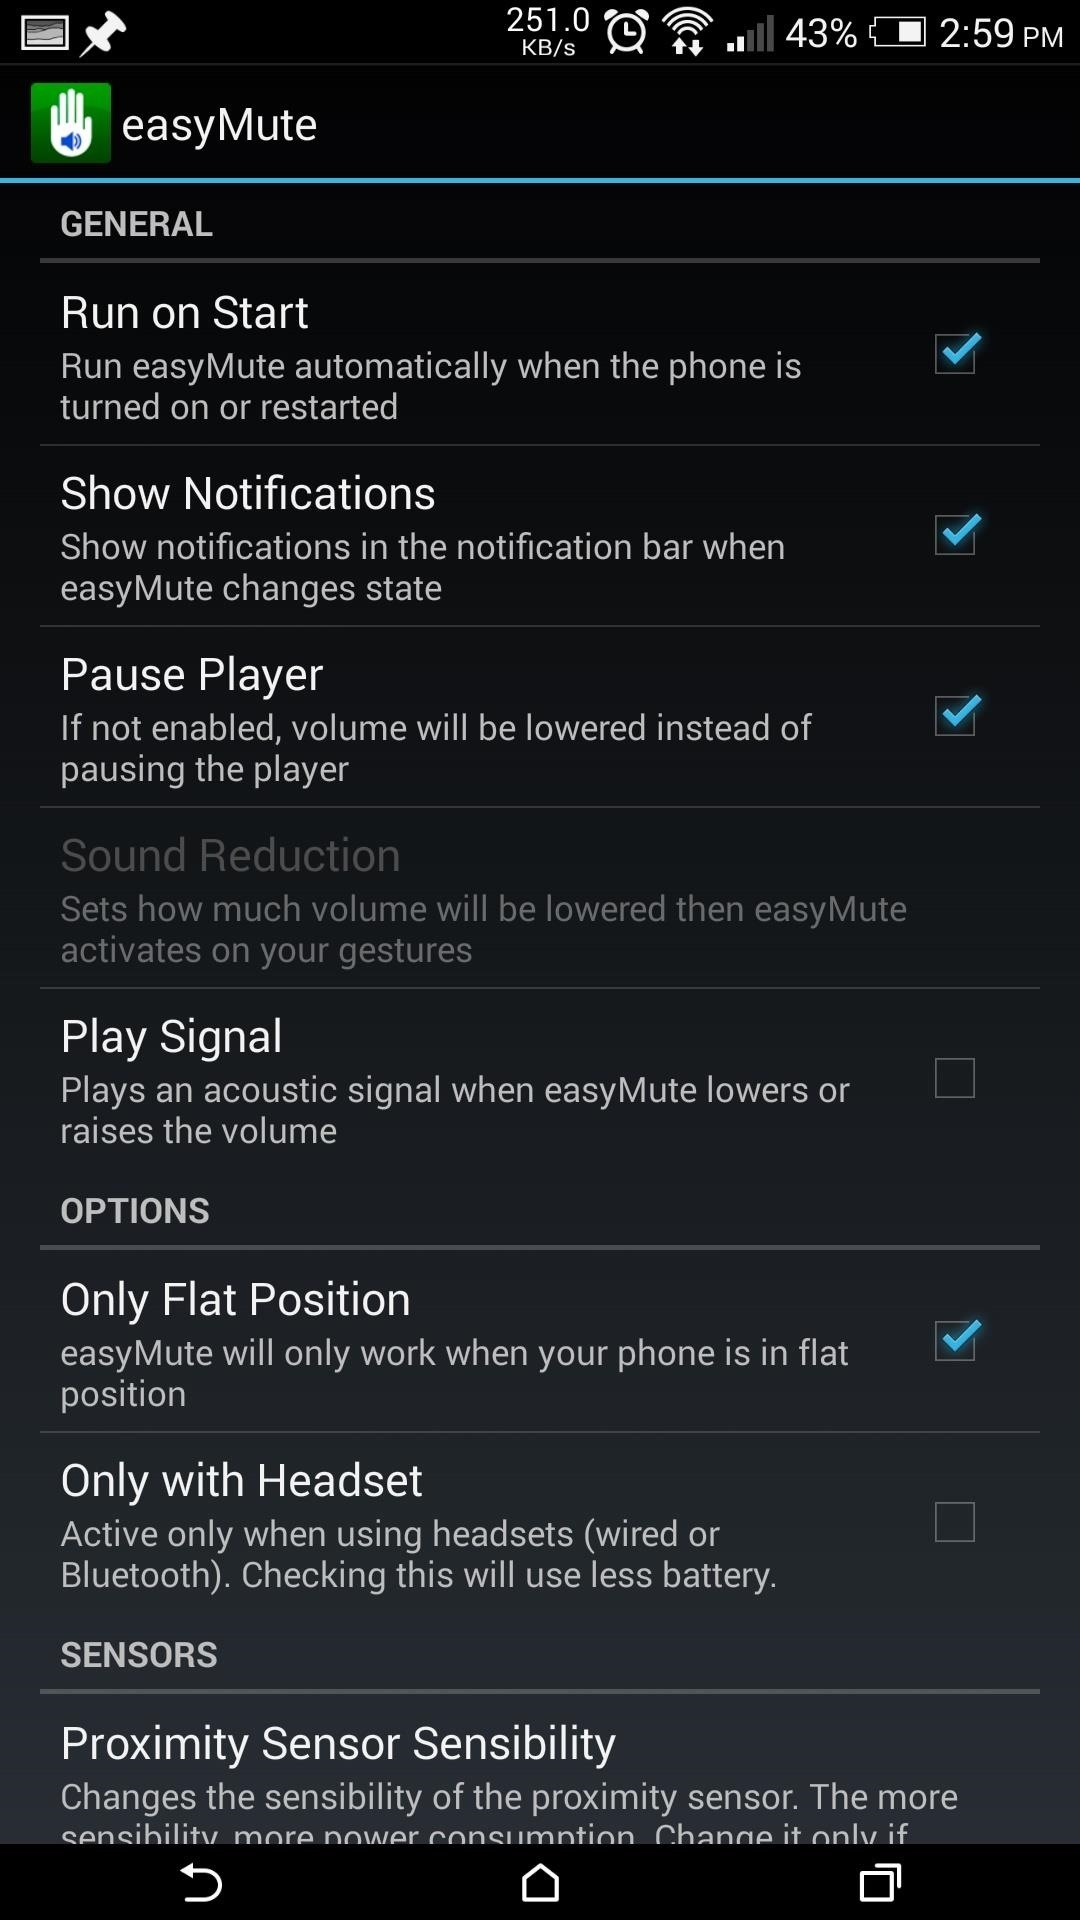 How to Mute or Pause Music on Your HTC One by Just Waving Your Hand